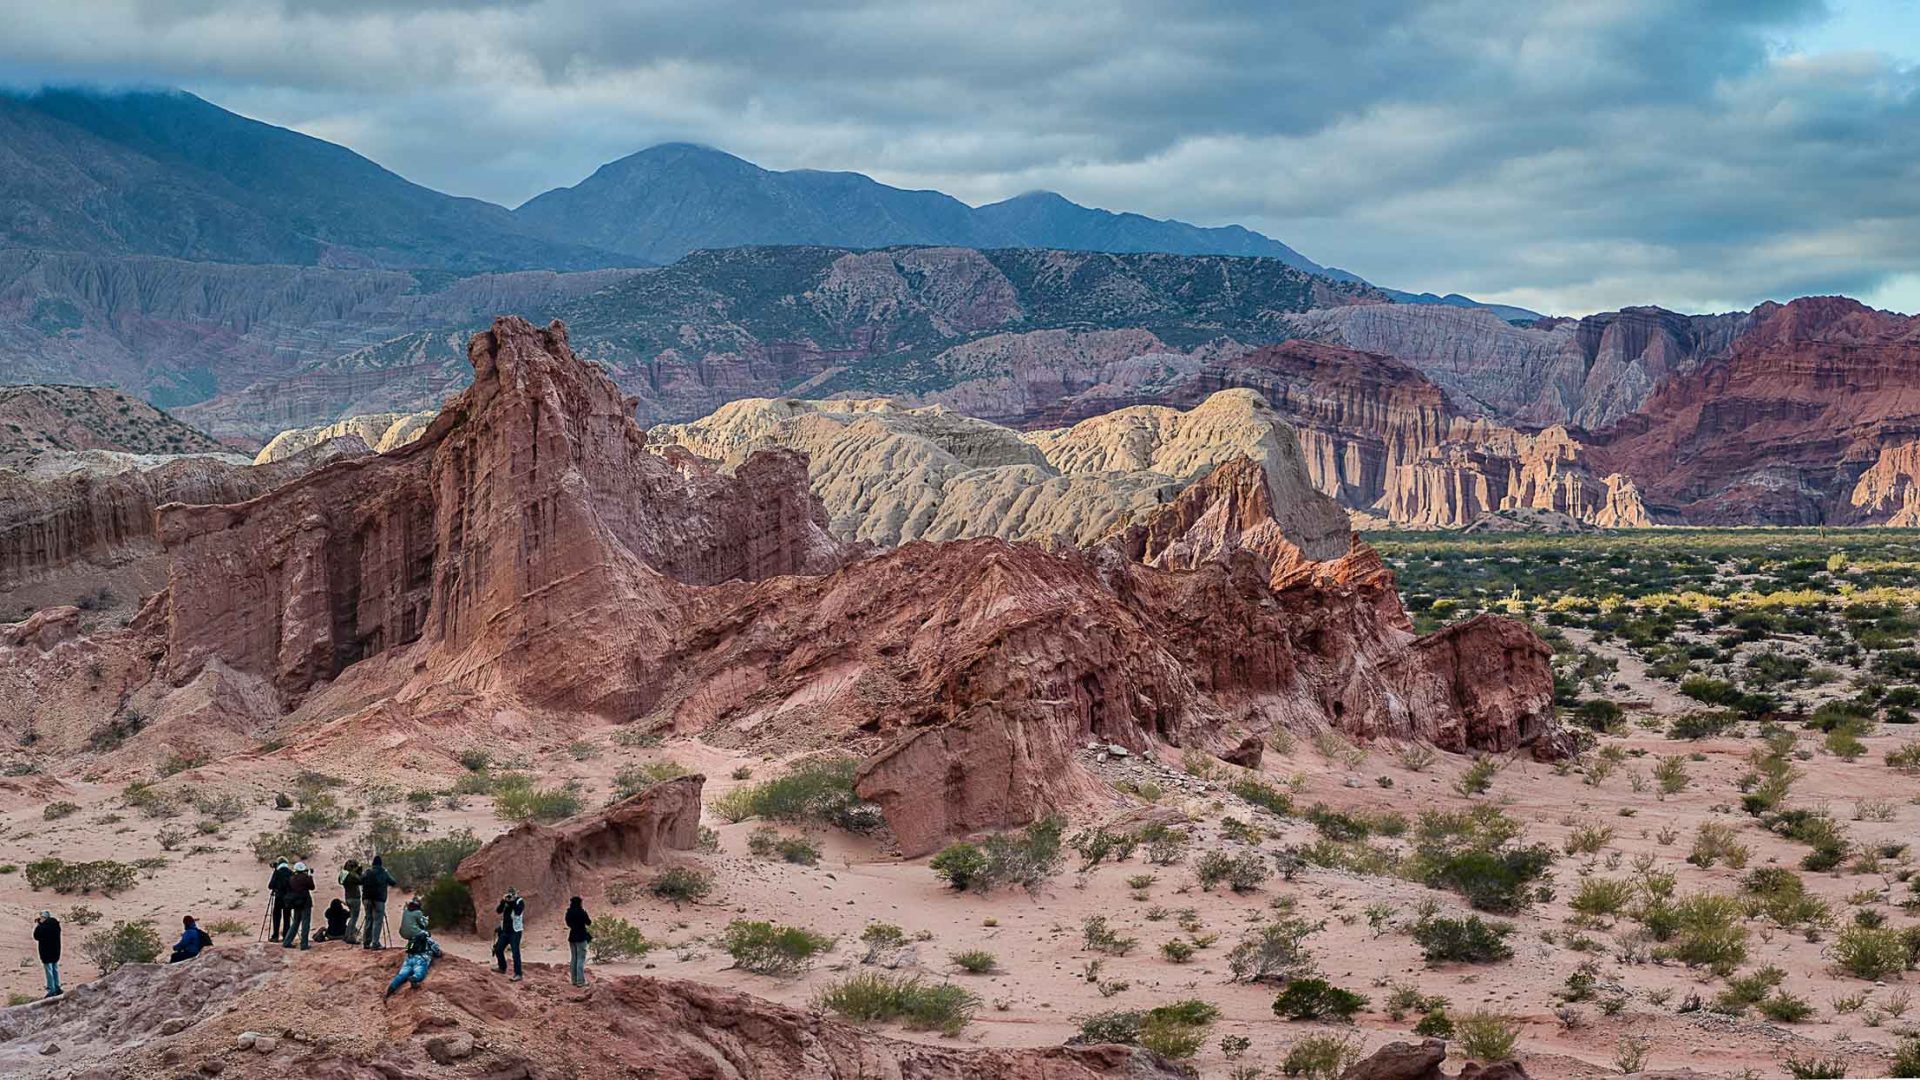 Forget Patagonia, could Salta be Argentina’s next adventure playground